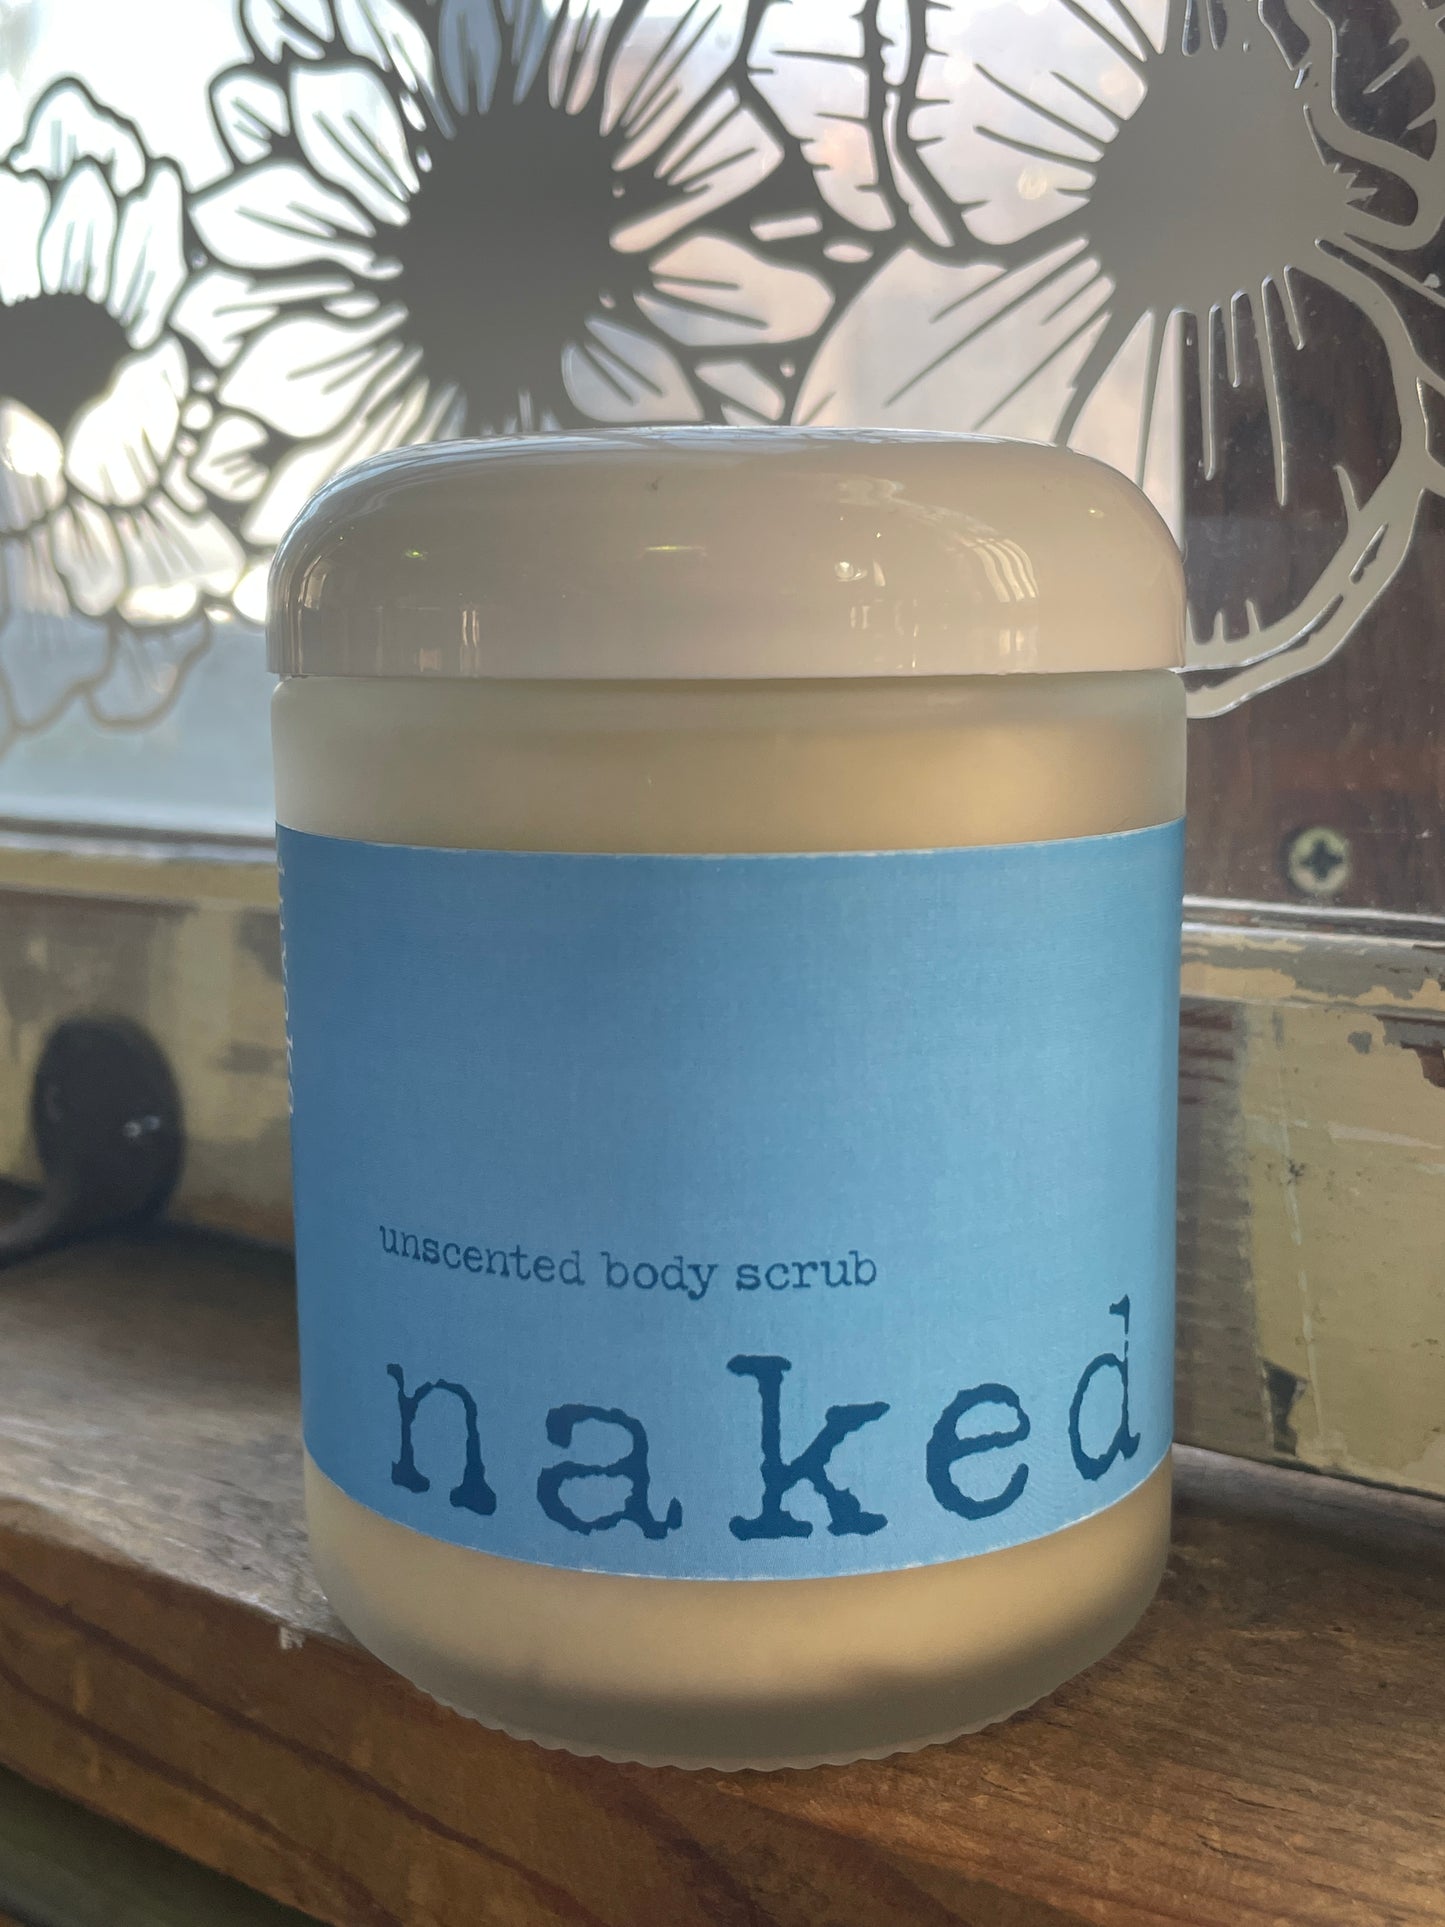 Invoka Subscription Whipped Body Butter  & Whipped Sugar Scrub